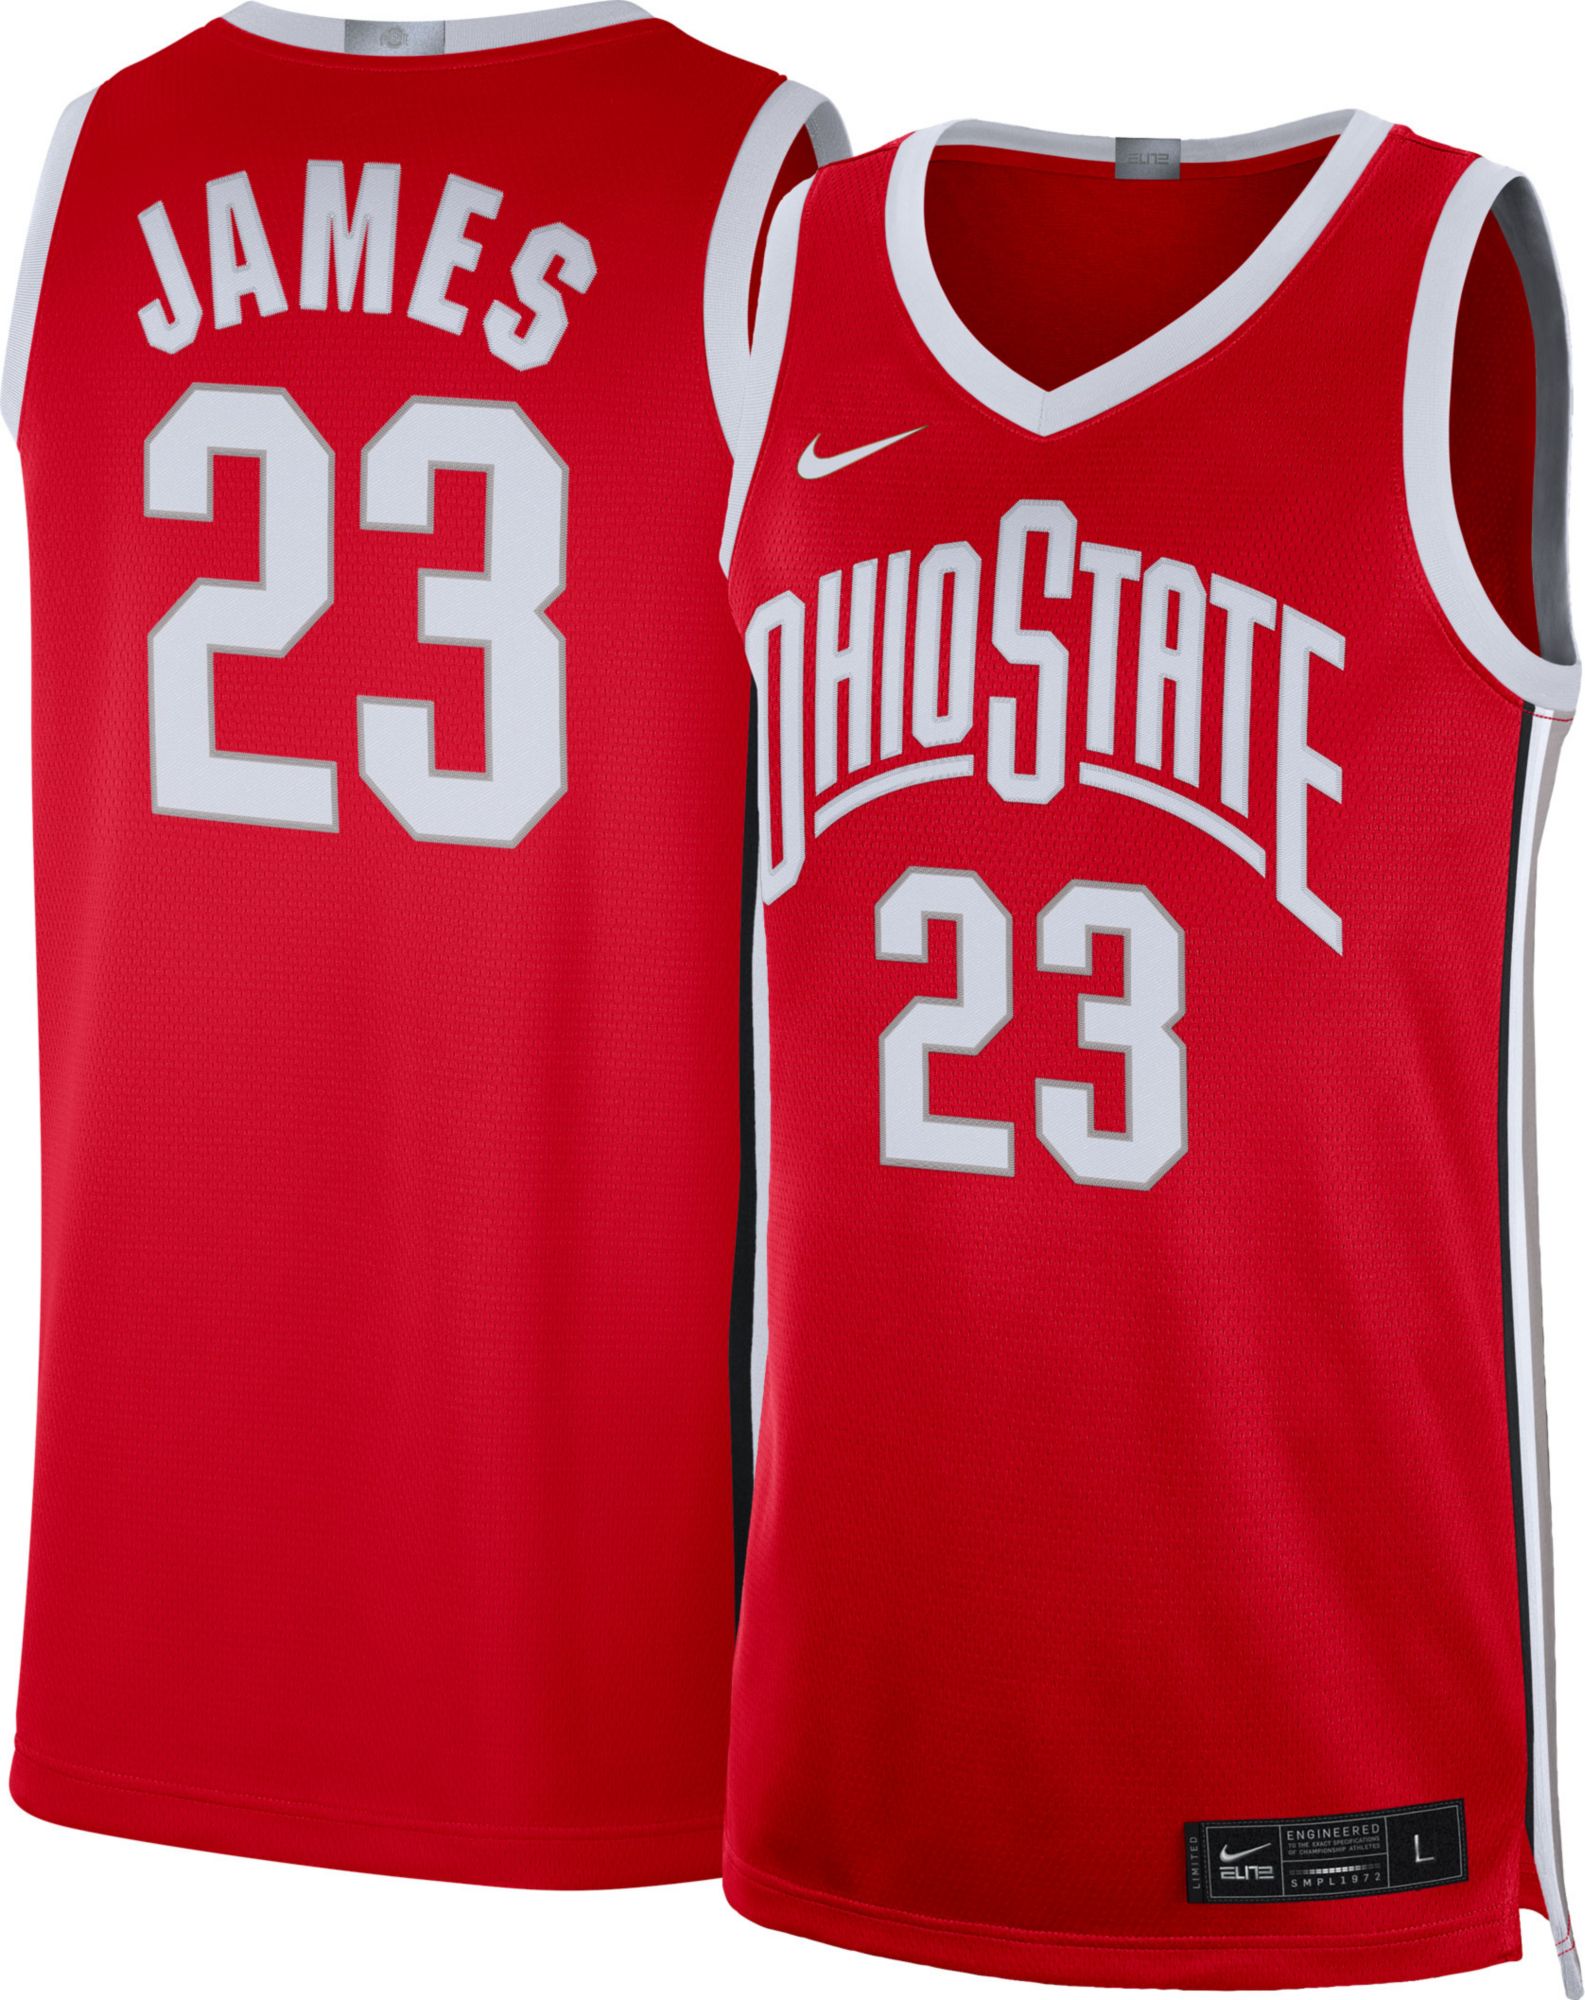 LeBron James Jerseys  Curbside Pickup Available at DICK'S